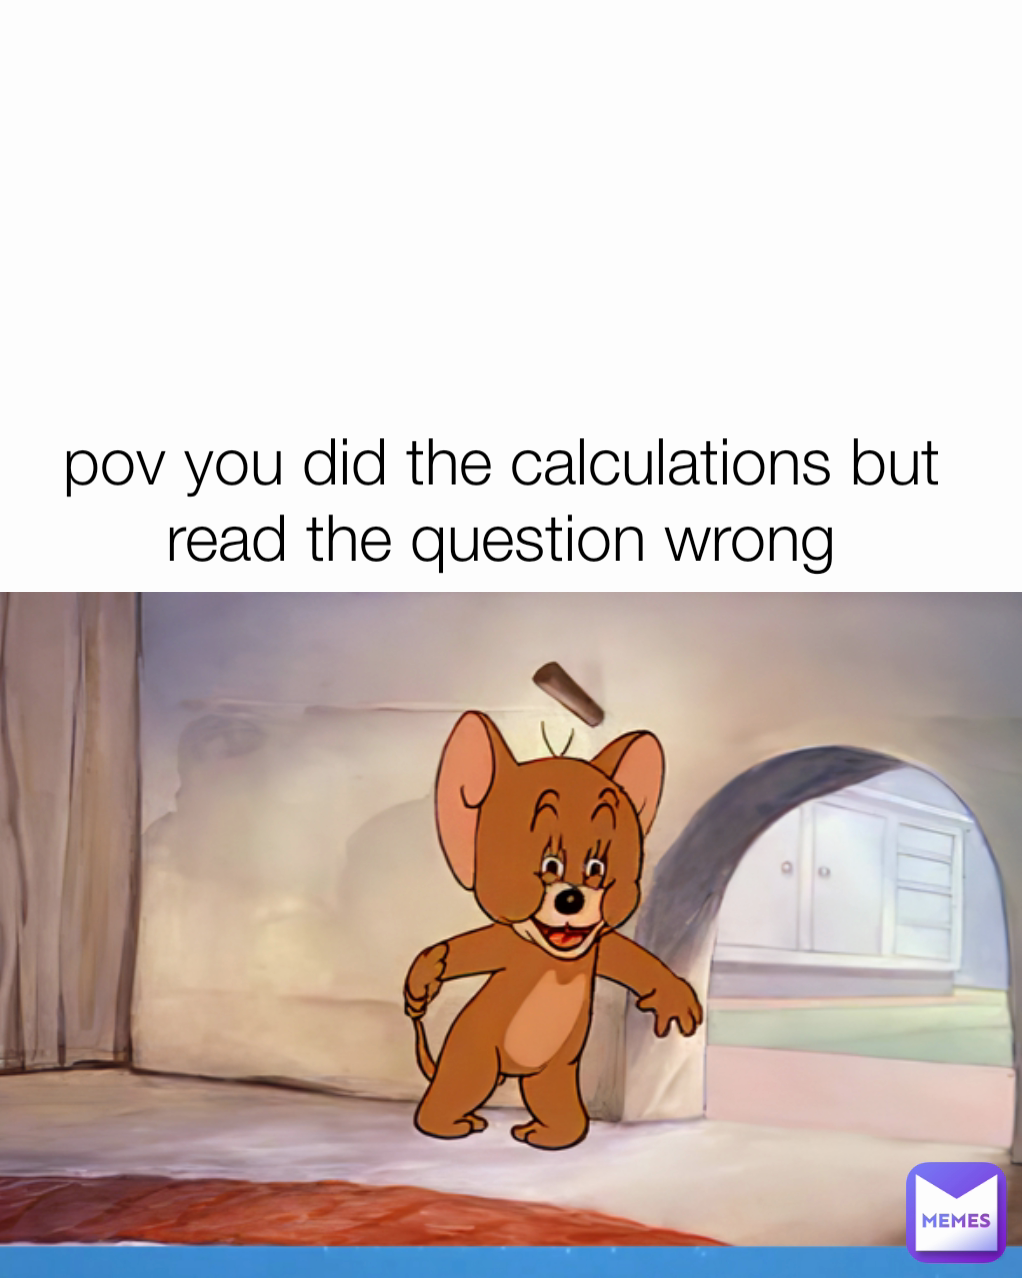 pov you did the calculations but read the question wrong